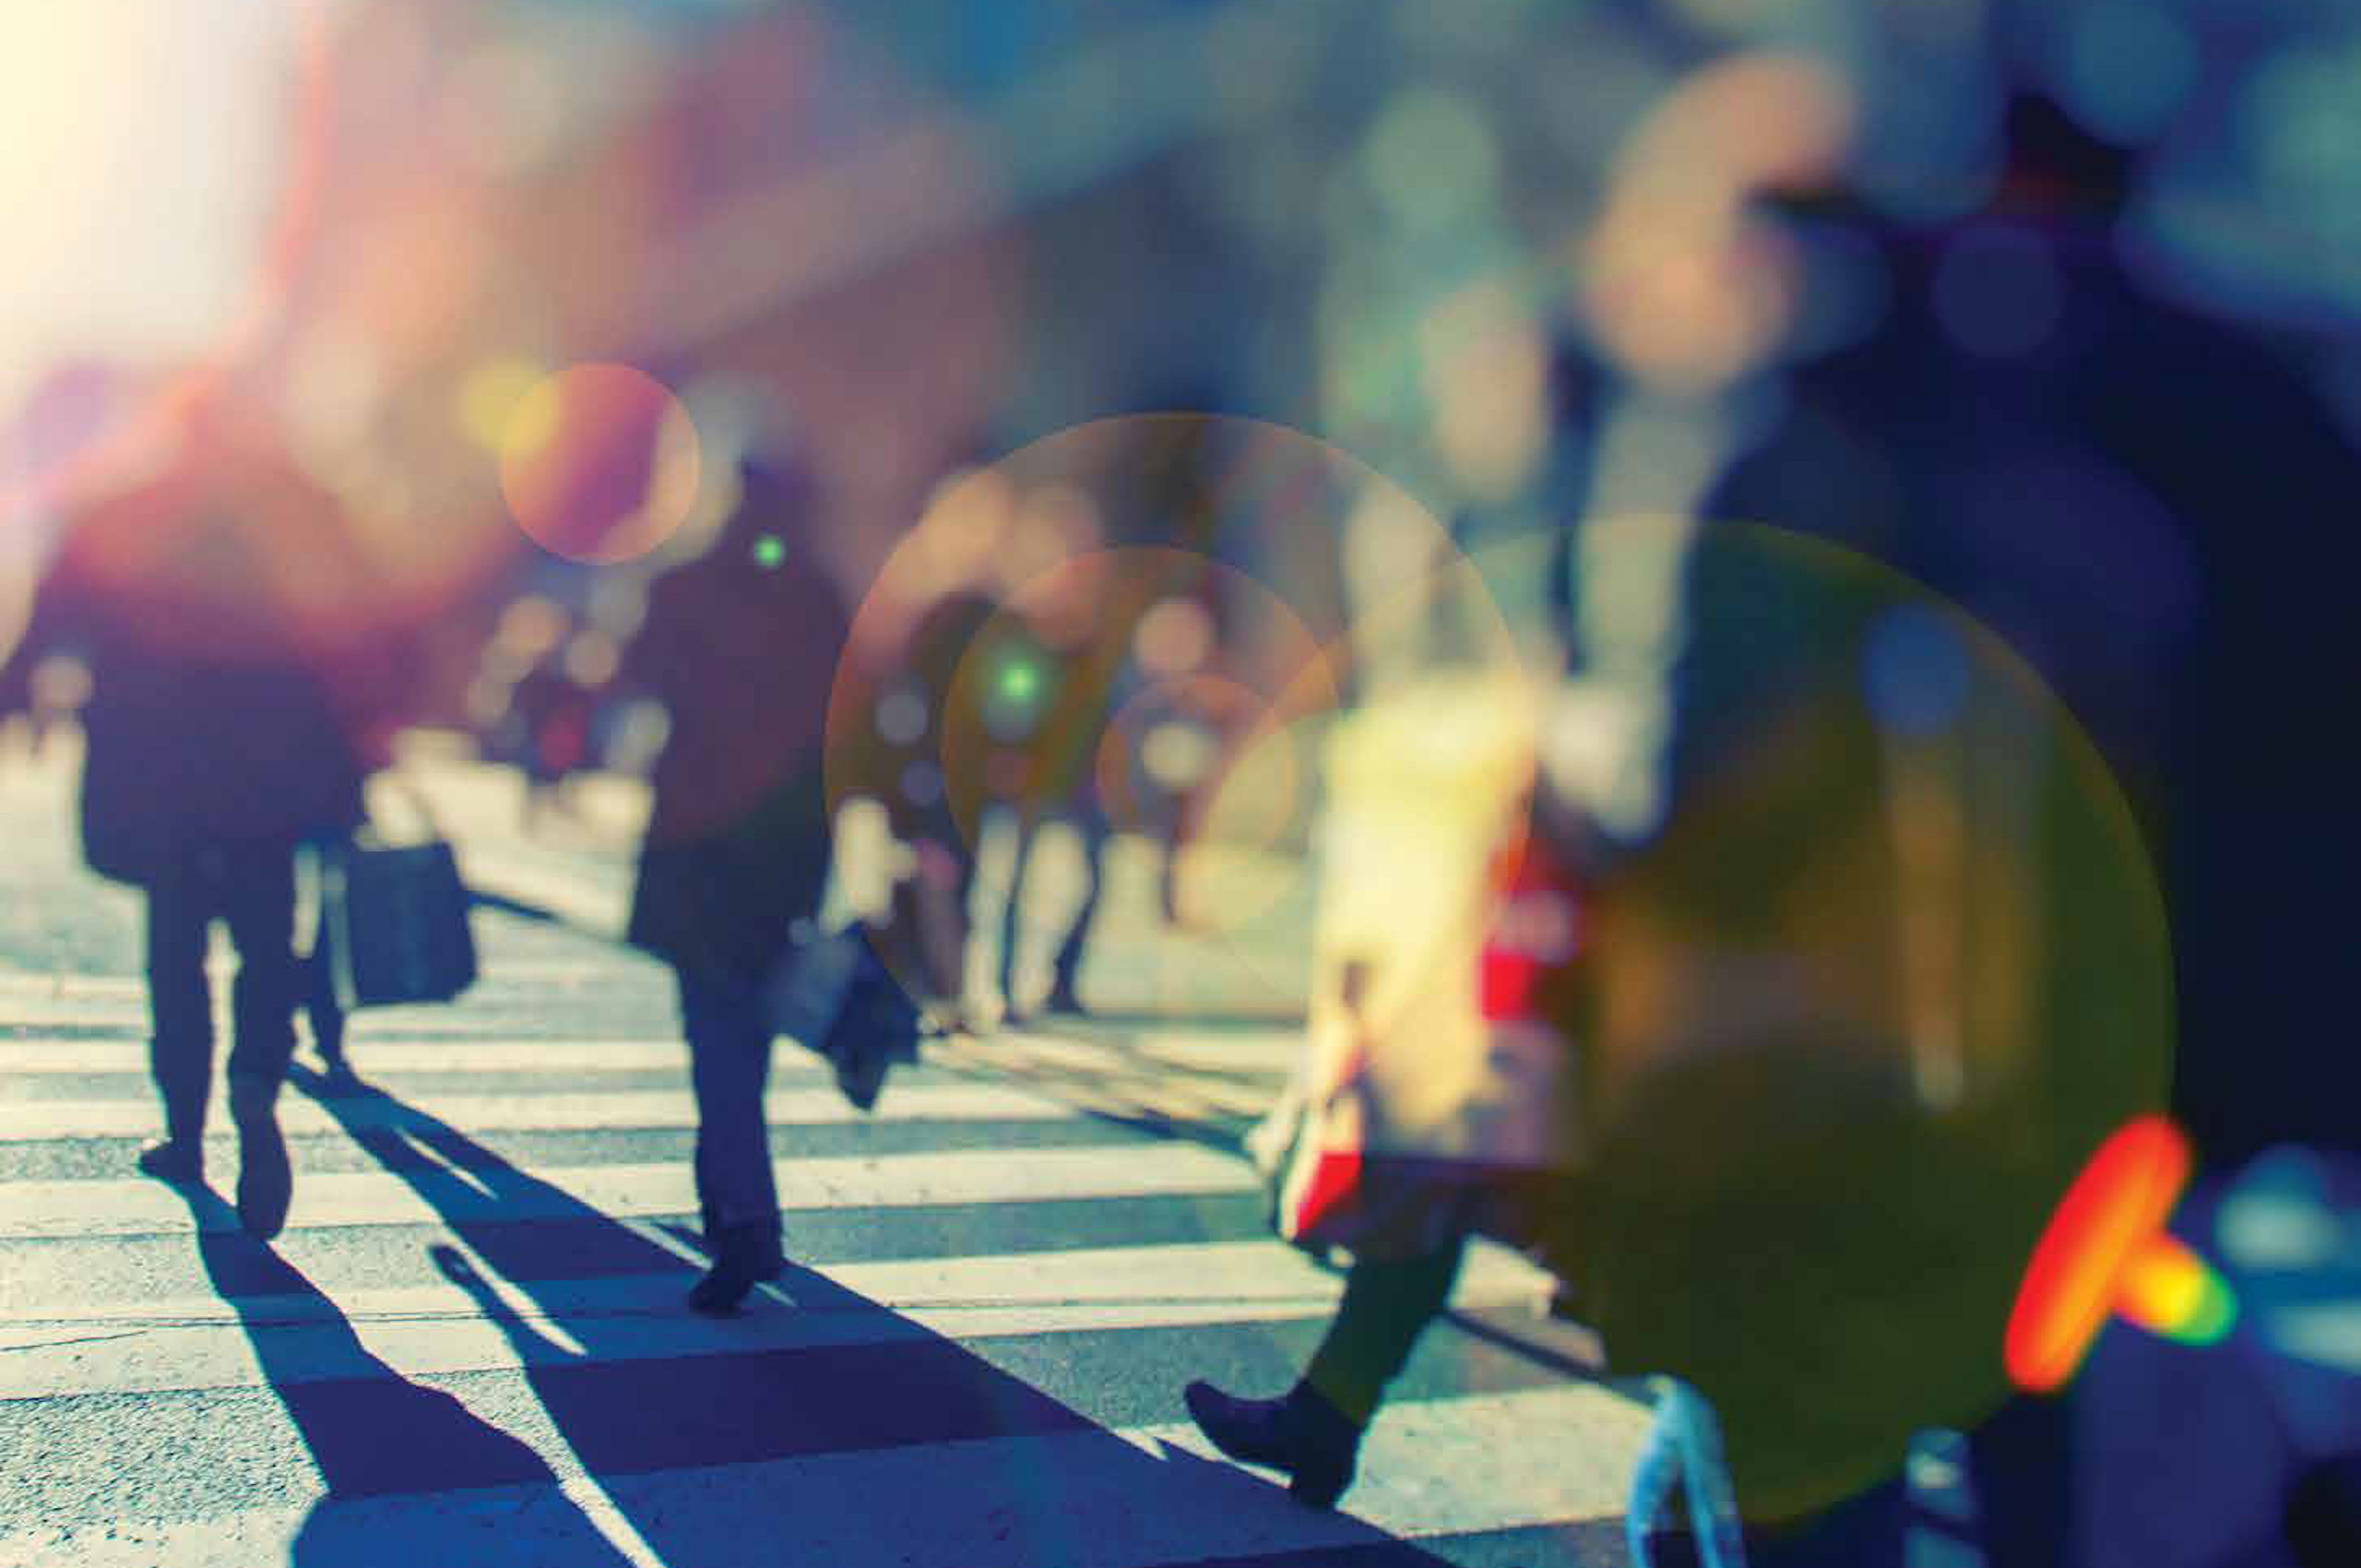 High-contrast, partly blurred image of people walking across a zebra crossing with colourful lens flare